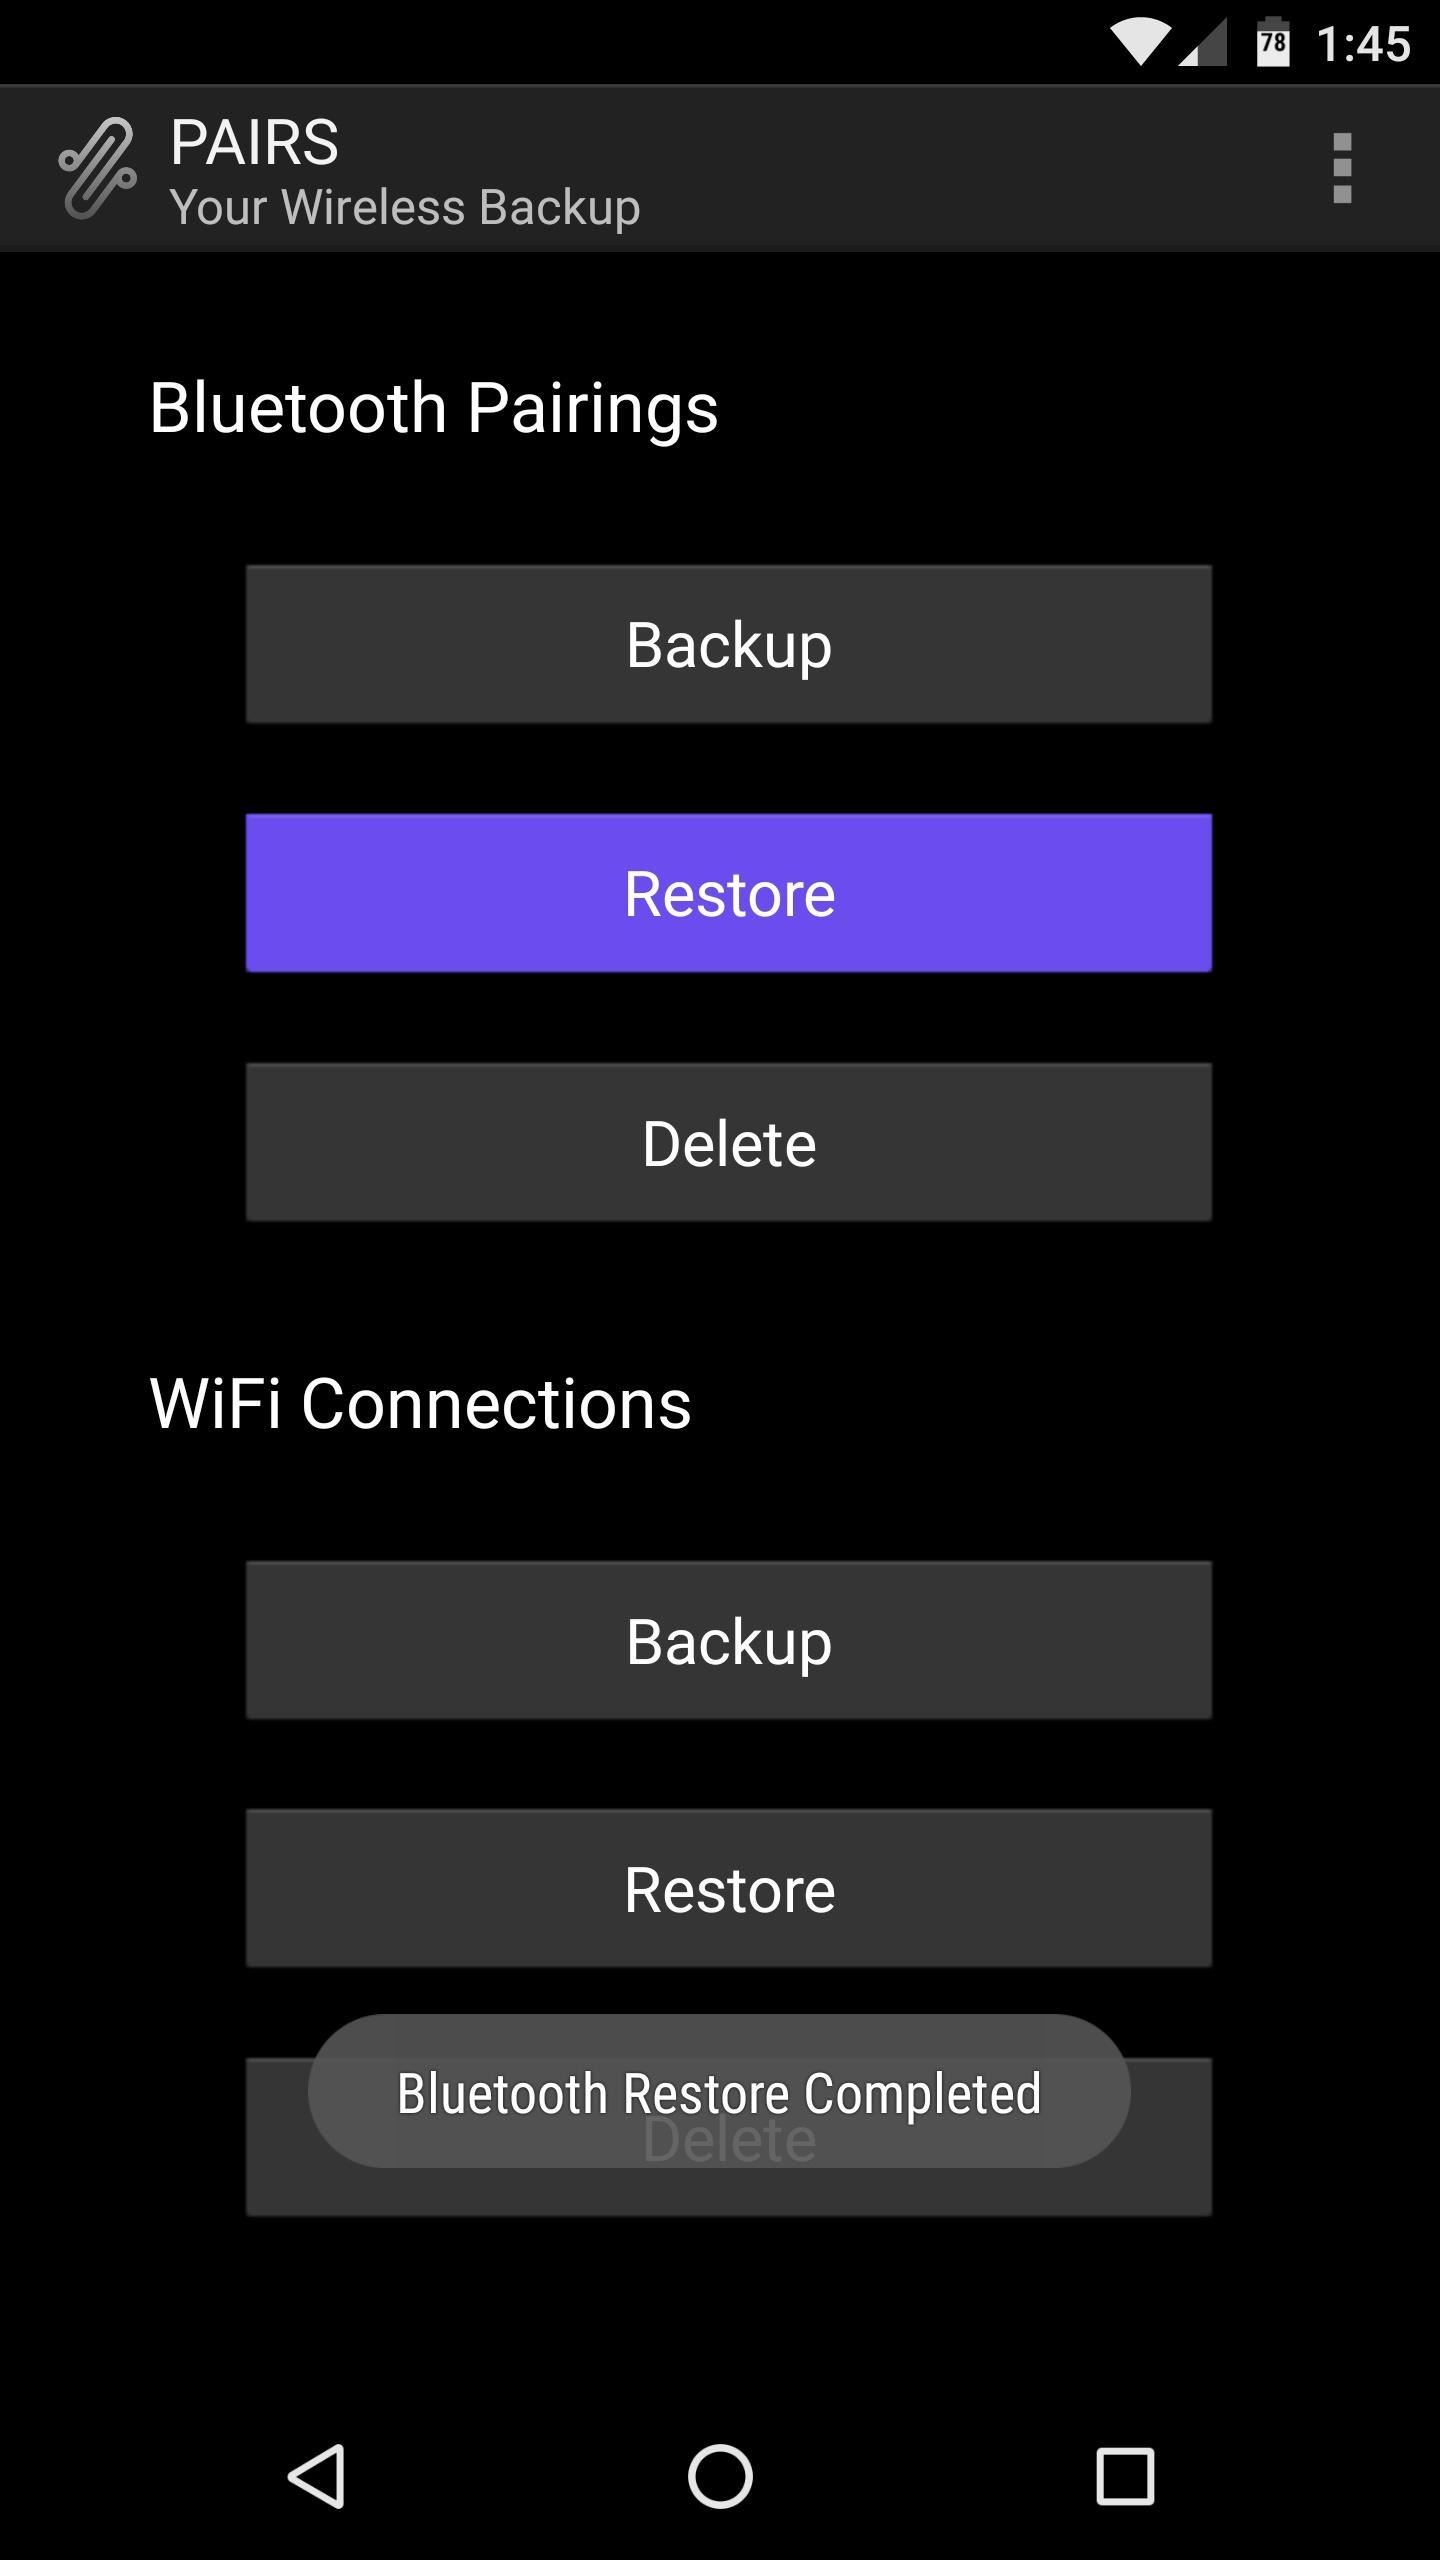 PAIRS Is the Easy Way to Restore Wi-Fi & Bluetooth Connections After Wiping Your Phone